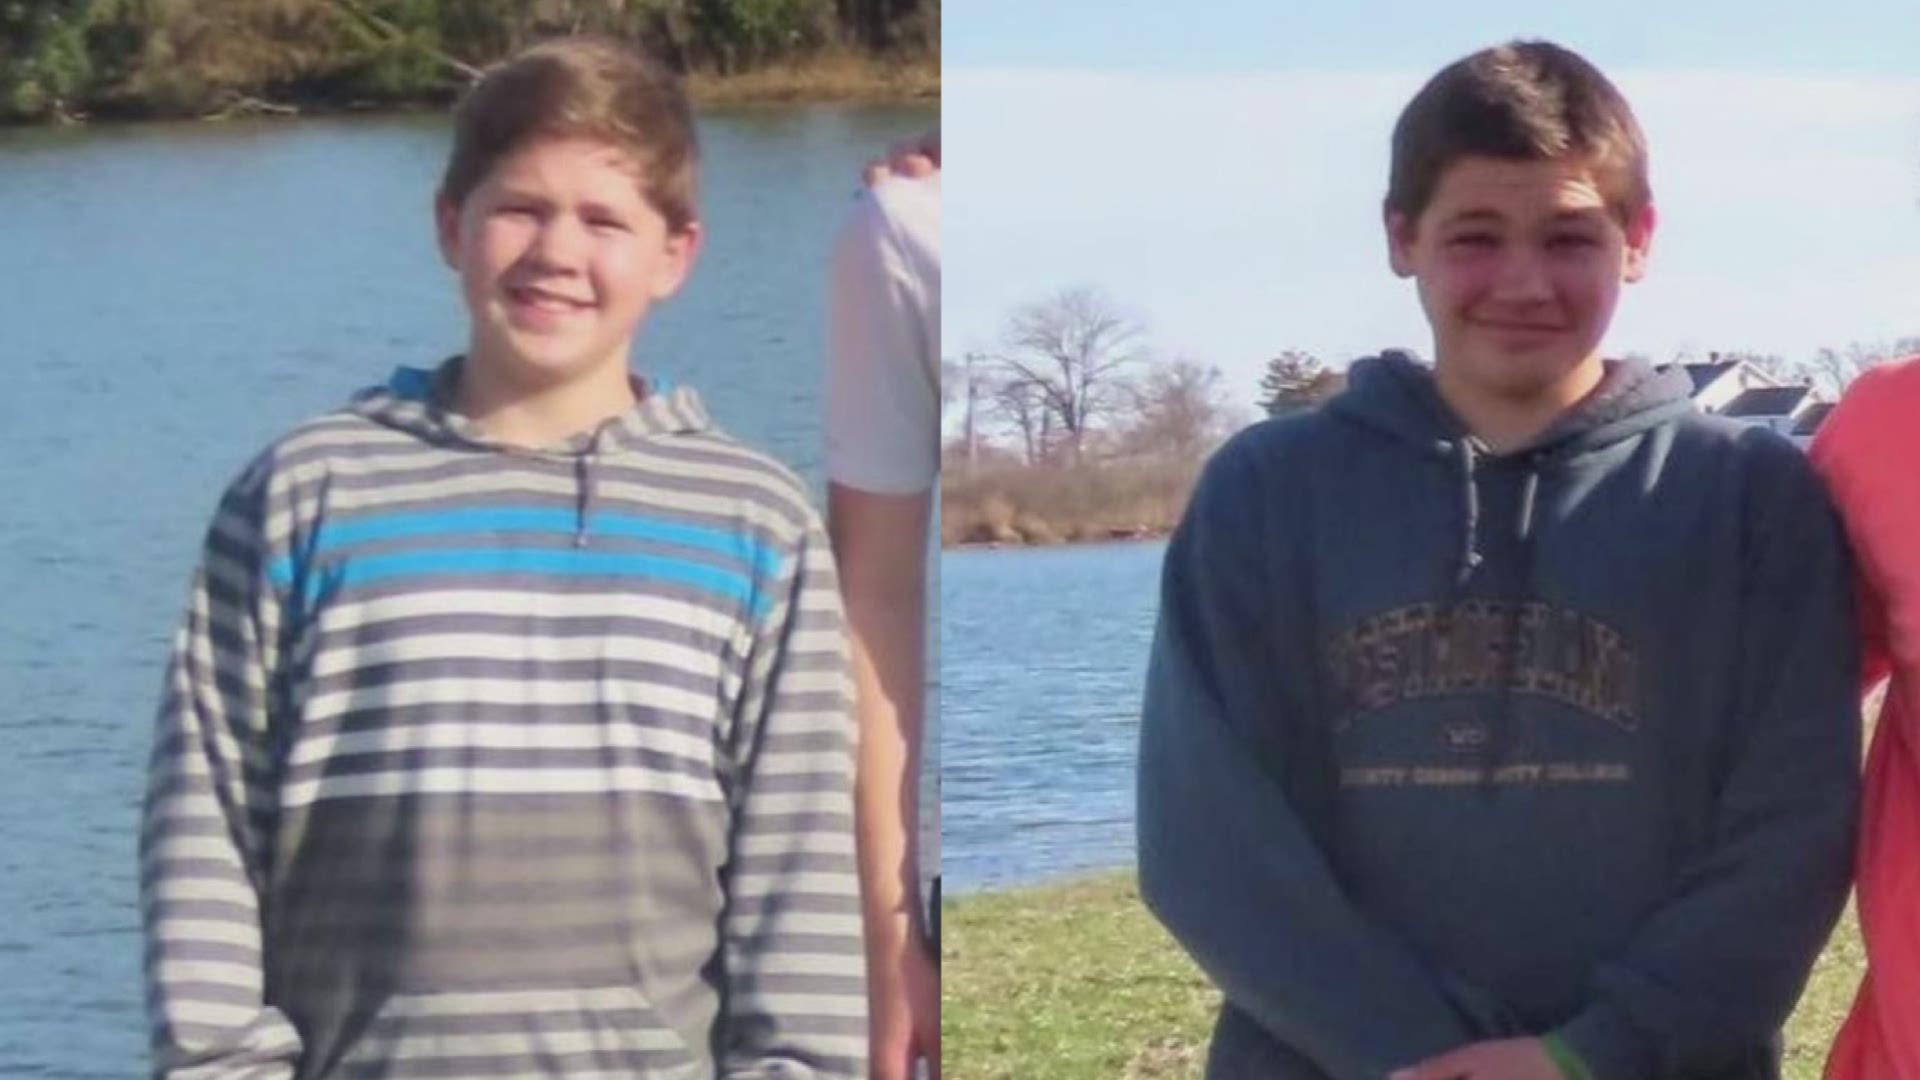 The St. Mary’s County Sheriff’s Office said 13-year-old Jesse Oleg Clark and his 15-year-old brother, Josiah Vladimir Clark, were found Tuesday afternoon.